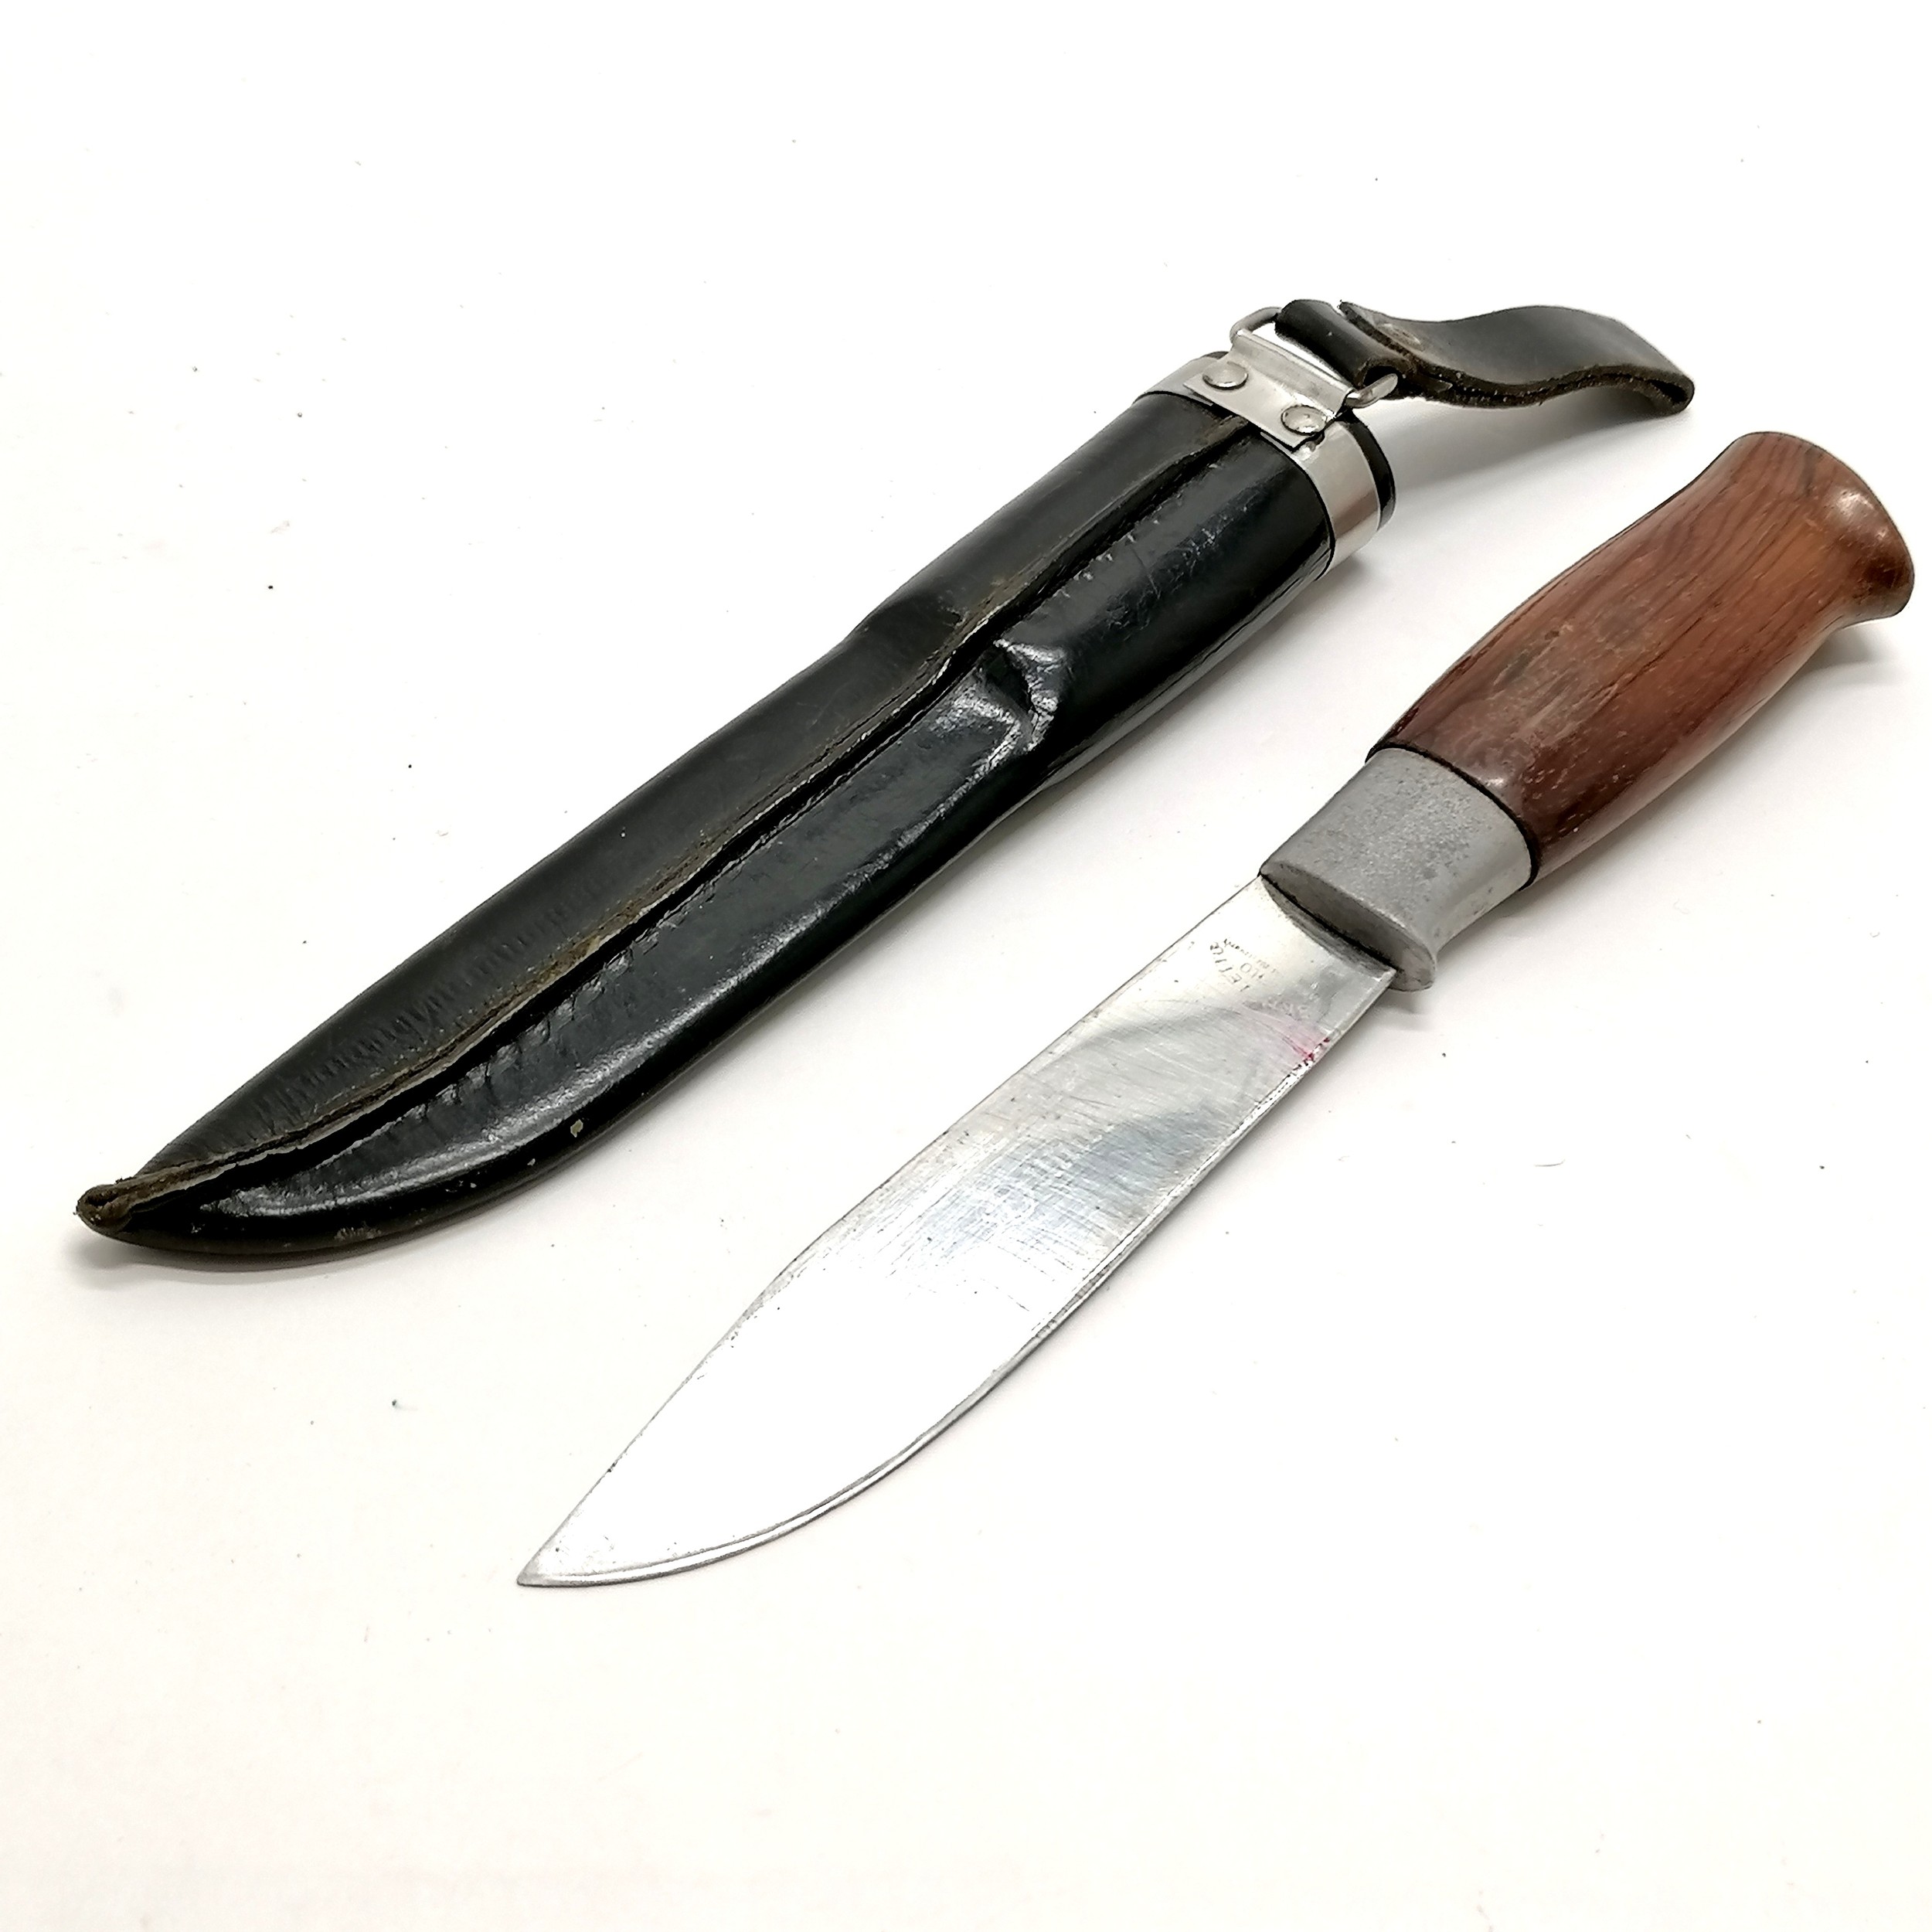 Brusletto Geilo Norwegian hunting knife in sheath (total length 27cm) t/w antique folding knife / - Image 9 of 10